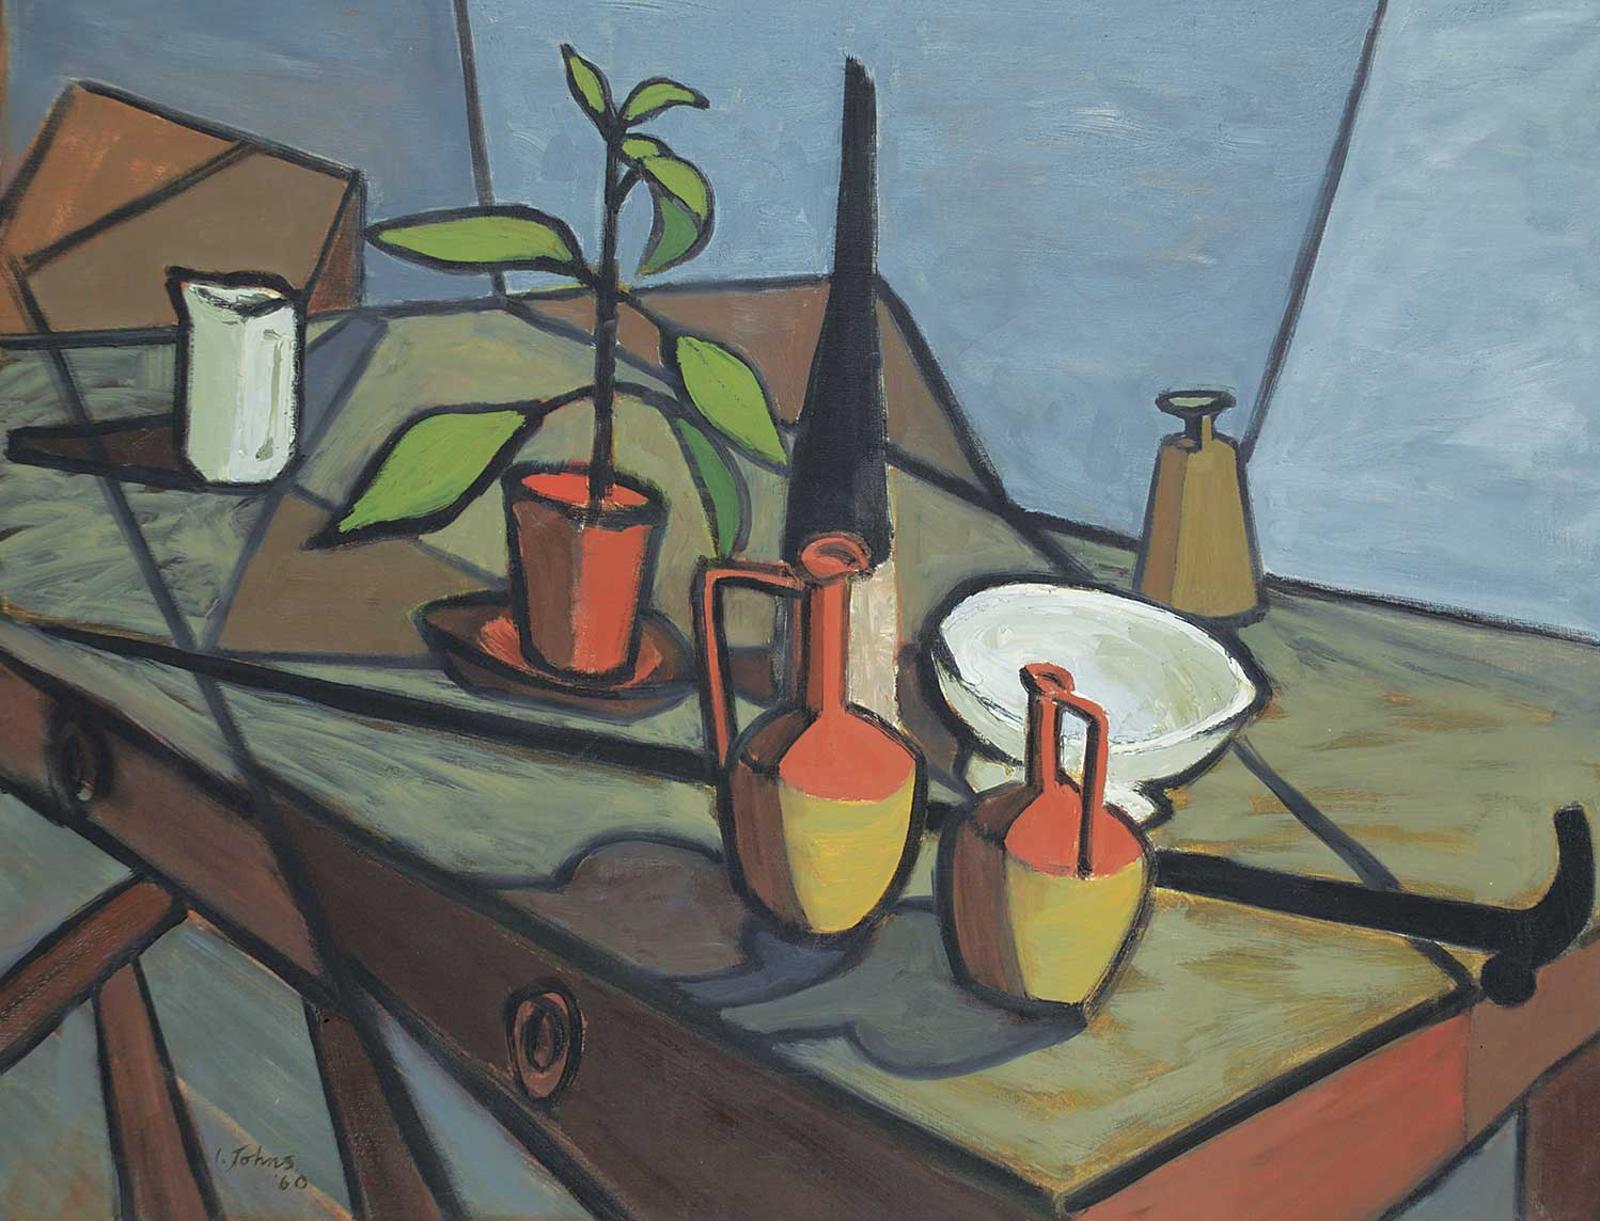 Iver Johns - Untitled - Afternoon Still Life